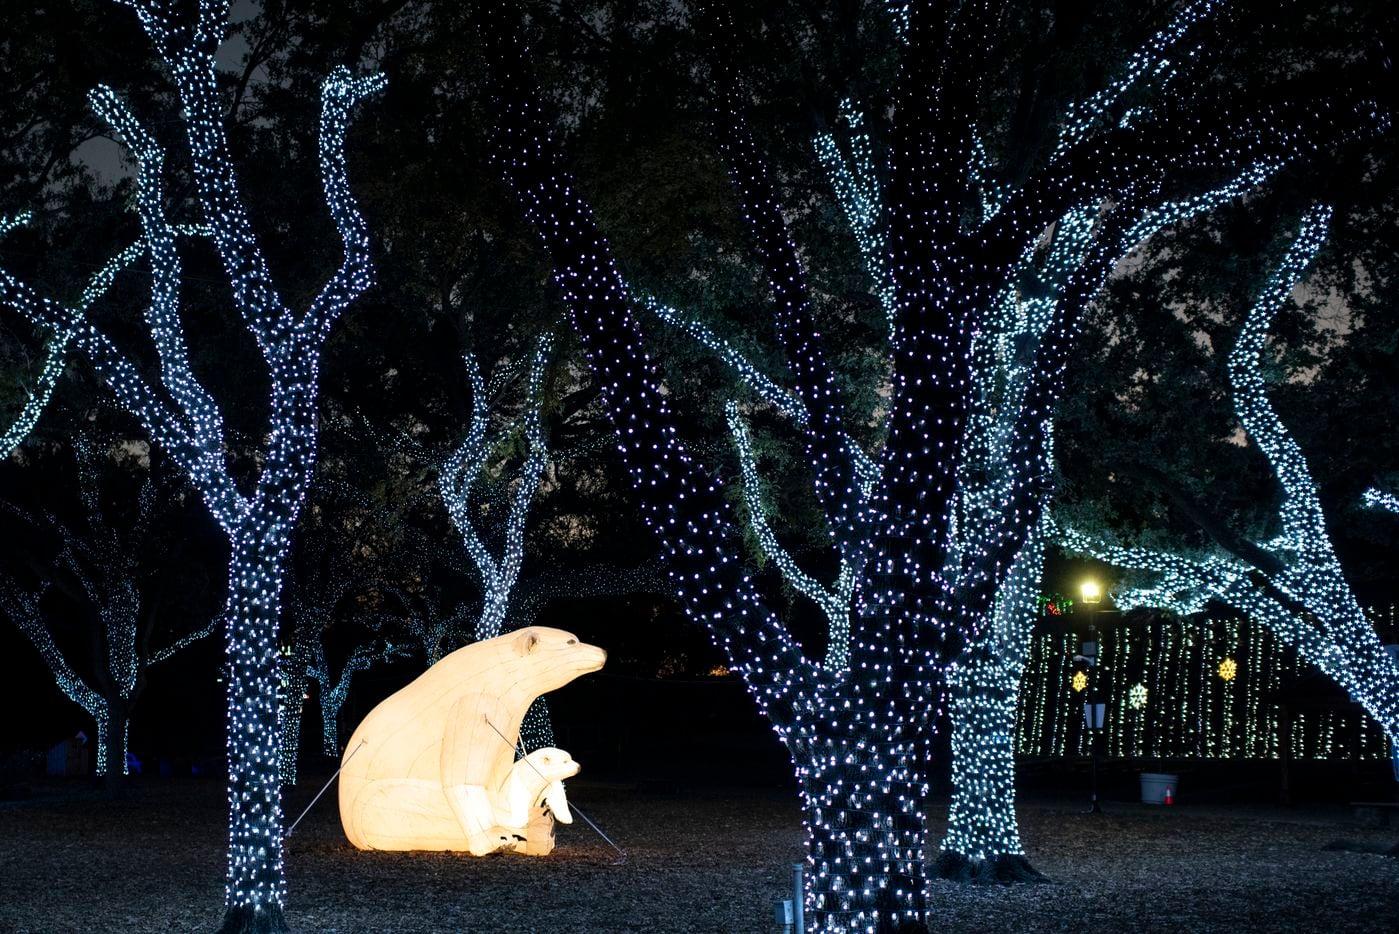 The Dallas Zoo's drive-through display has 1 million lights, light sculptures, moving images, light tunnels and silk-covered, animal-shaped lanterns. At the route’s end, there is a walk-through Holiday Village.